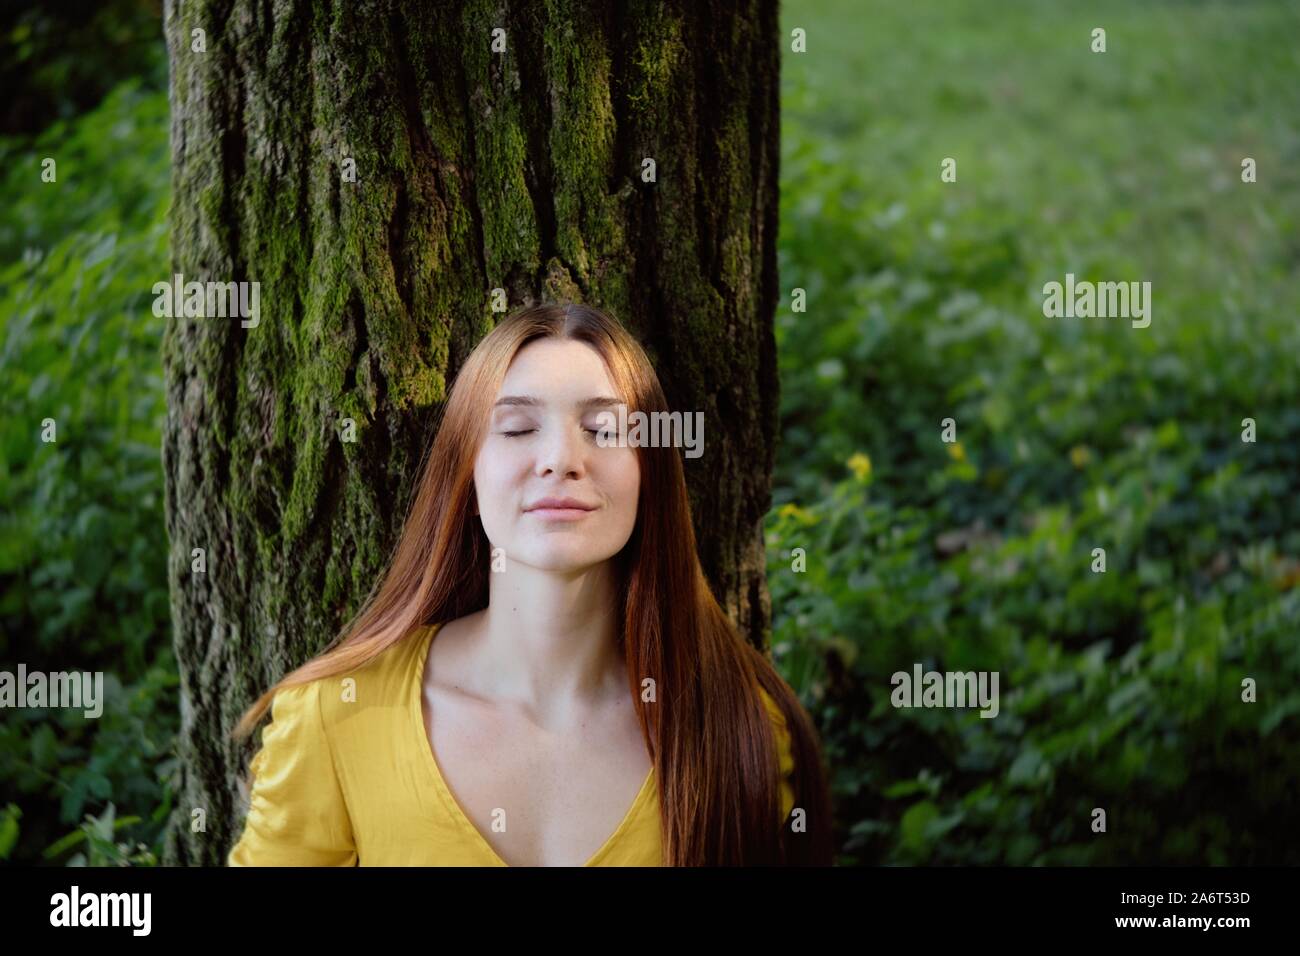 Redhead Woman Leaning On Tree Smiling With Closed Eyes Stock Photo